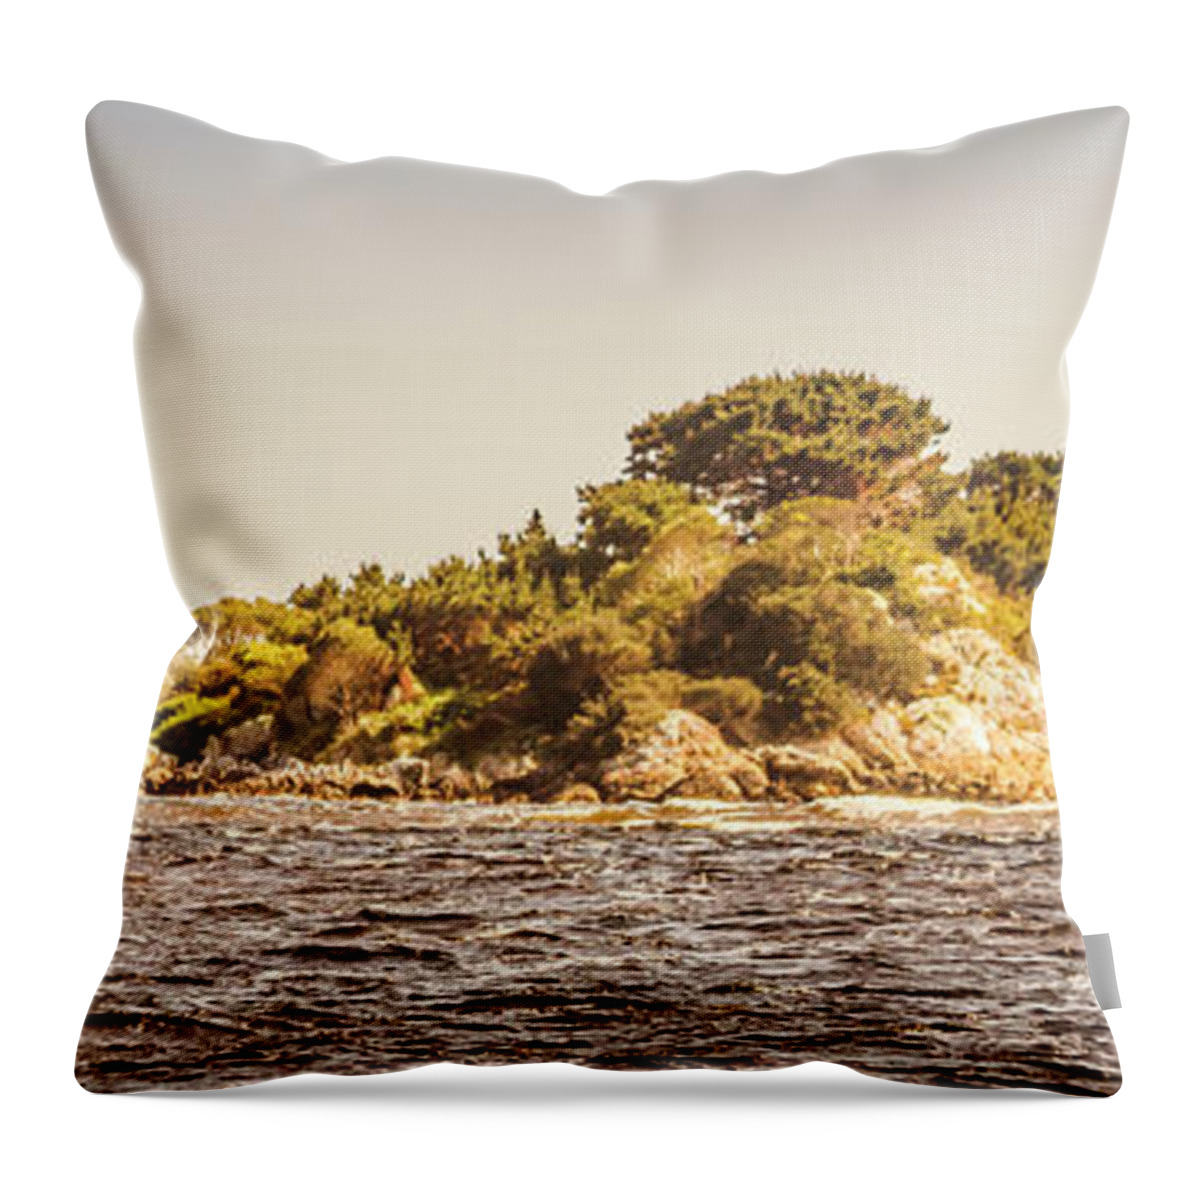 Island Throw Pillow featuring the photograph Entrance Island Lighthouse, Hells Gates by Jorgo Photography